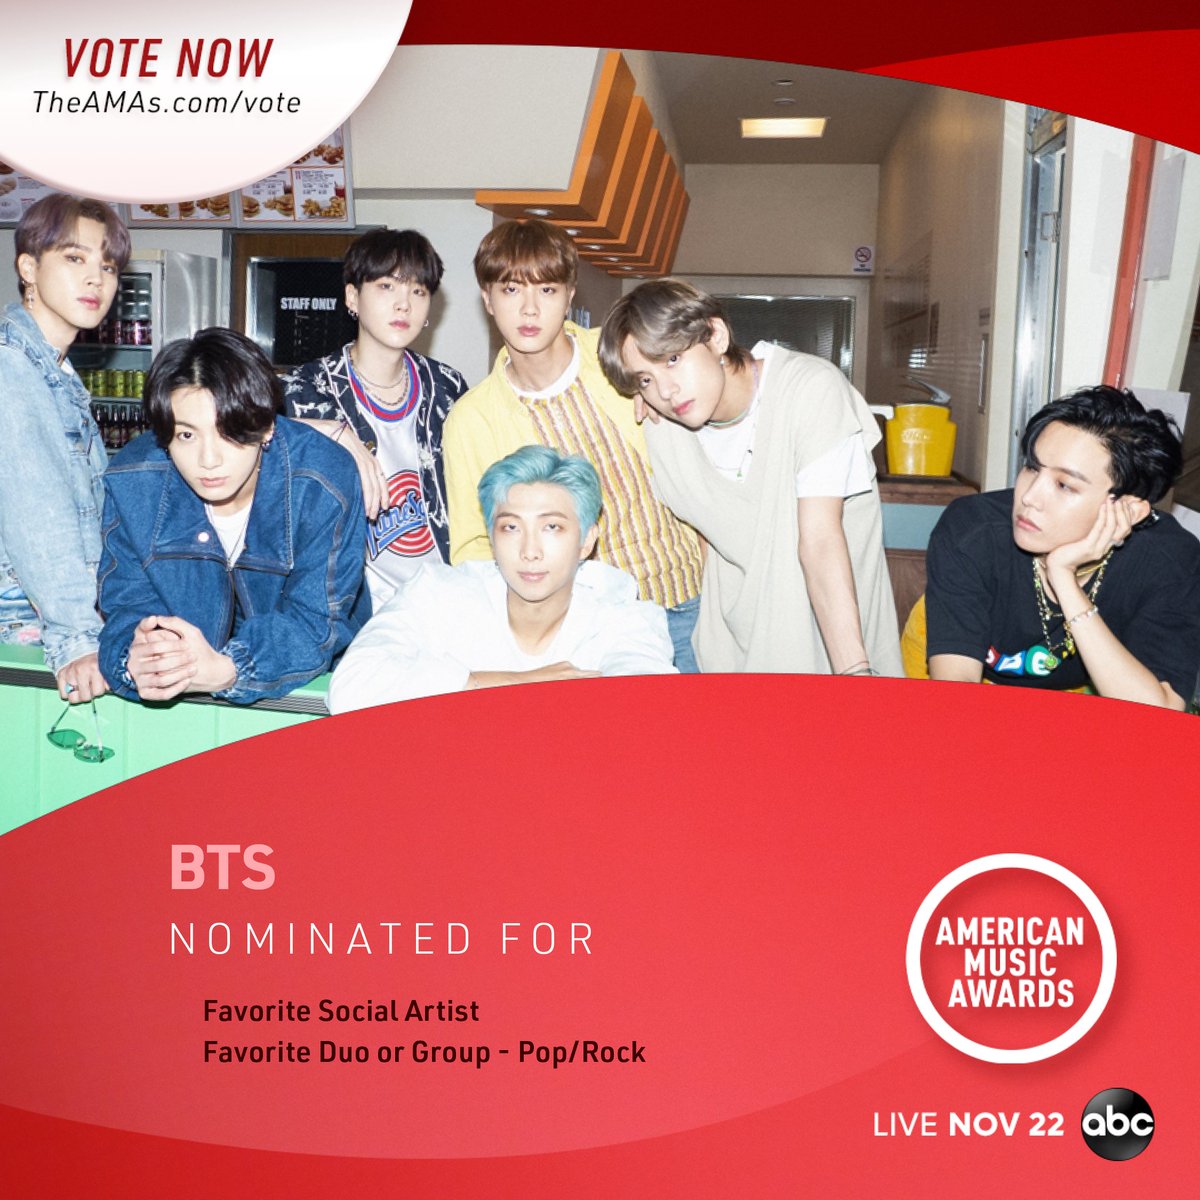 Bts Official On Twitter We Re So Excited To Be Nominated For The 2020 Amas Don T Miss The Show November 22nd At 8 7c On Abc Find More Info At Https T Co Jkjccpspys Amas Https T Co Toxaide6sk